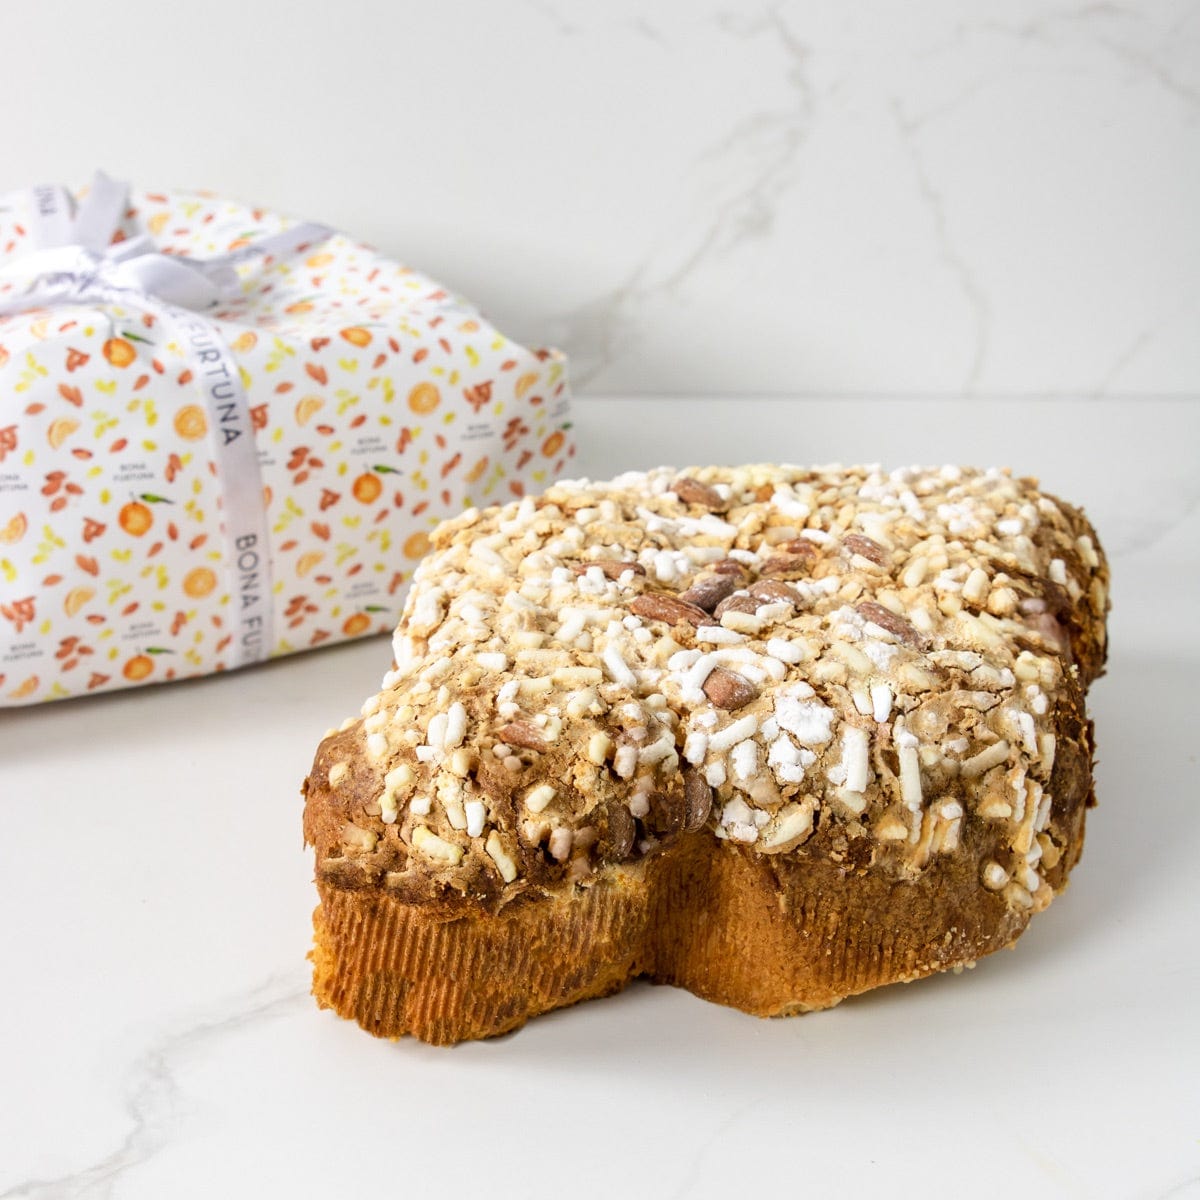 Discover Colomba, the Italian Easter Cake | Eataly